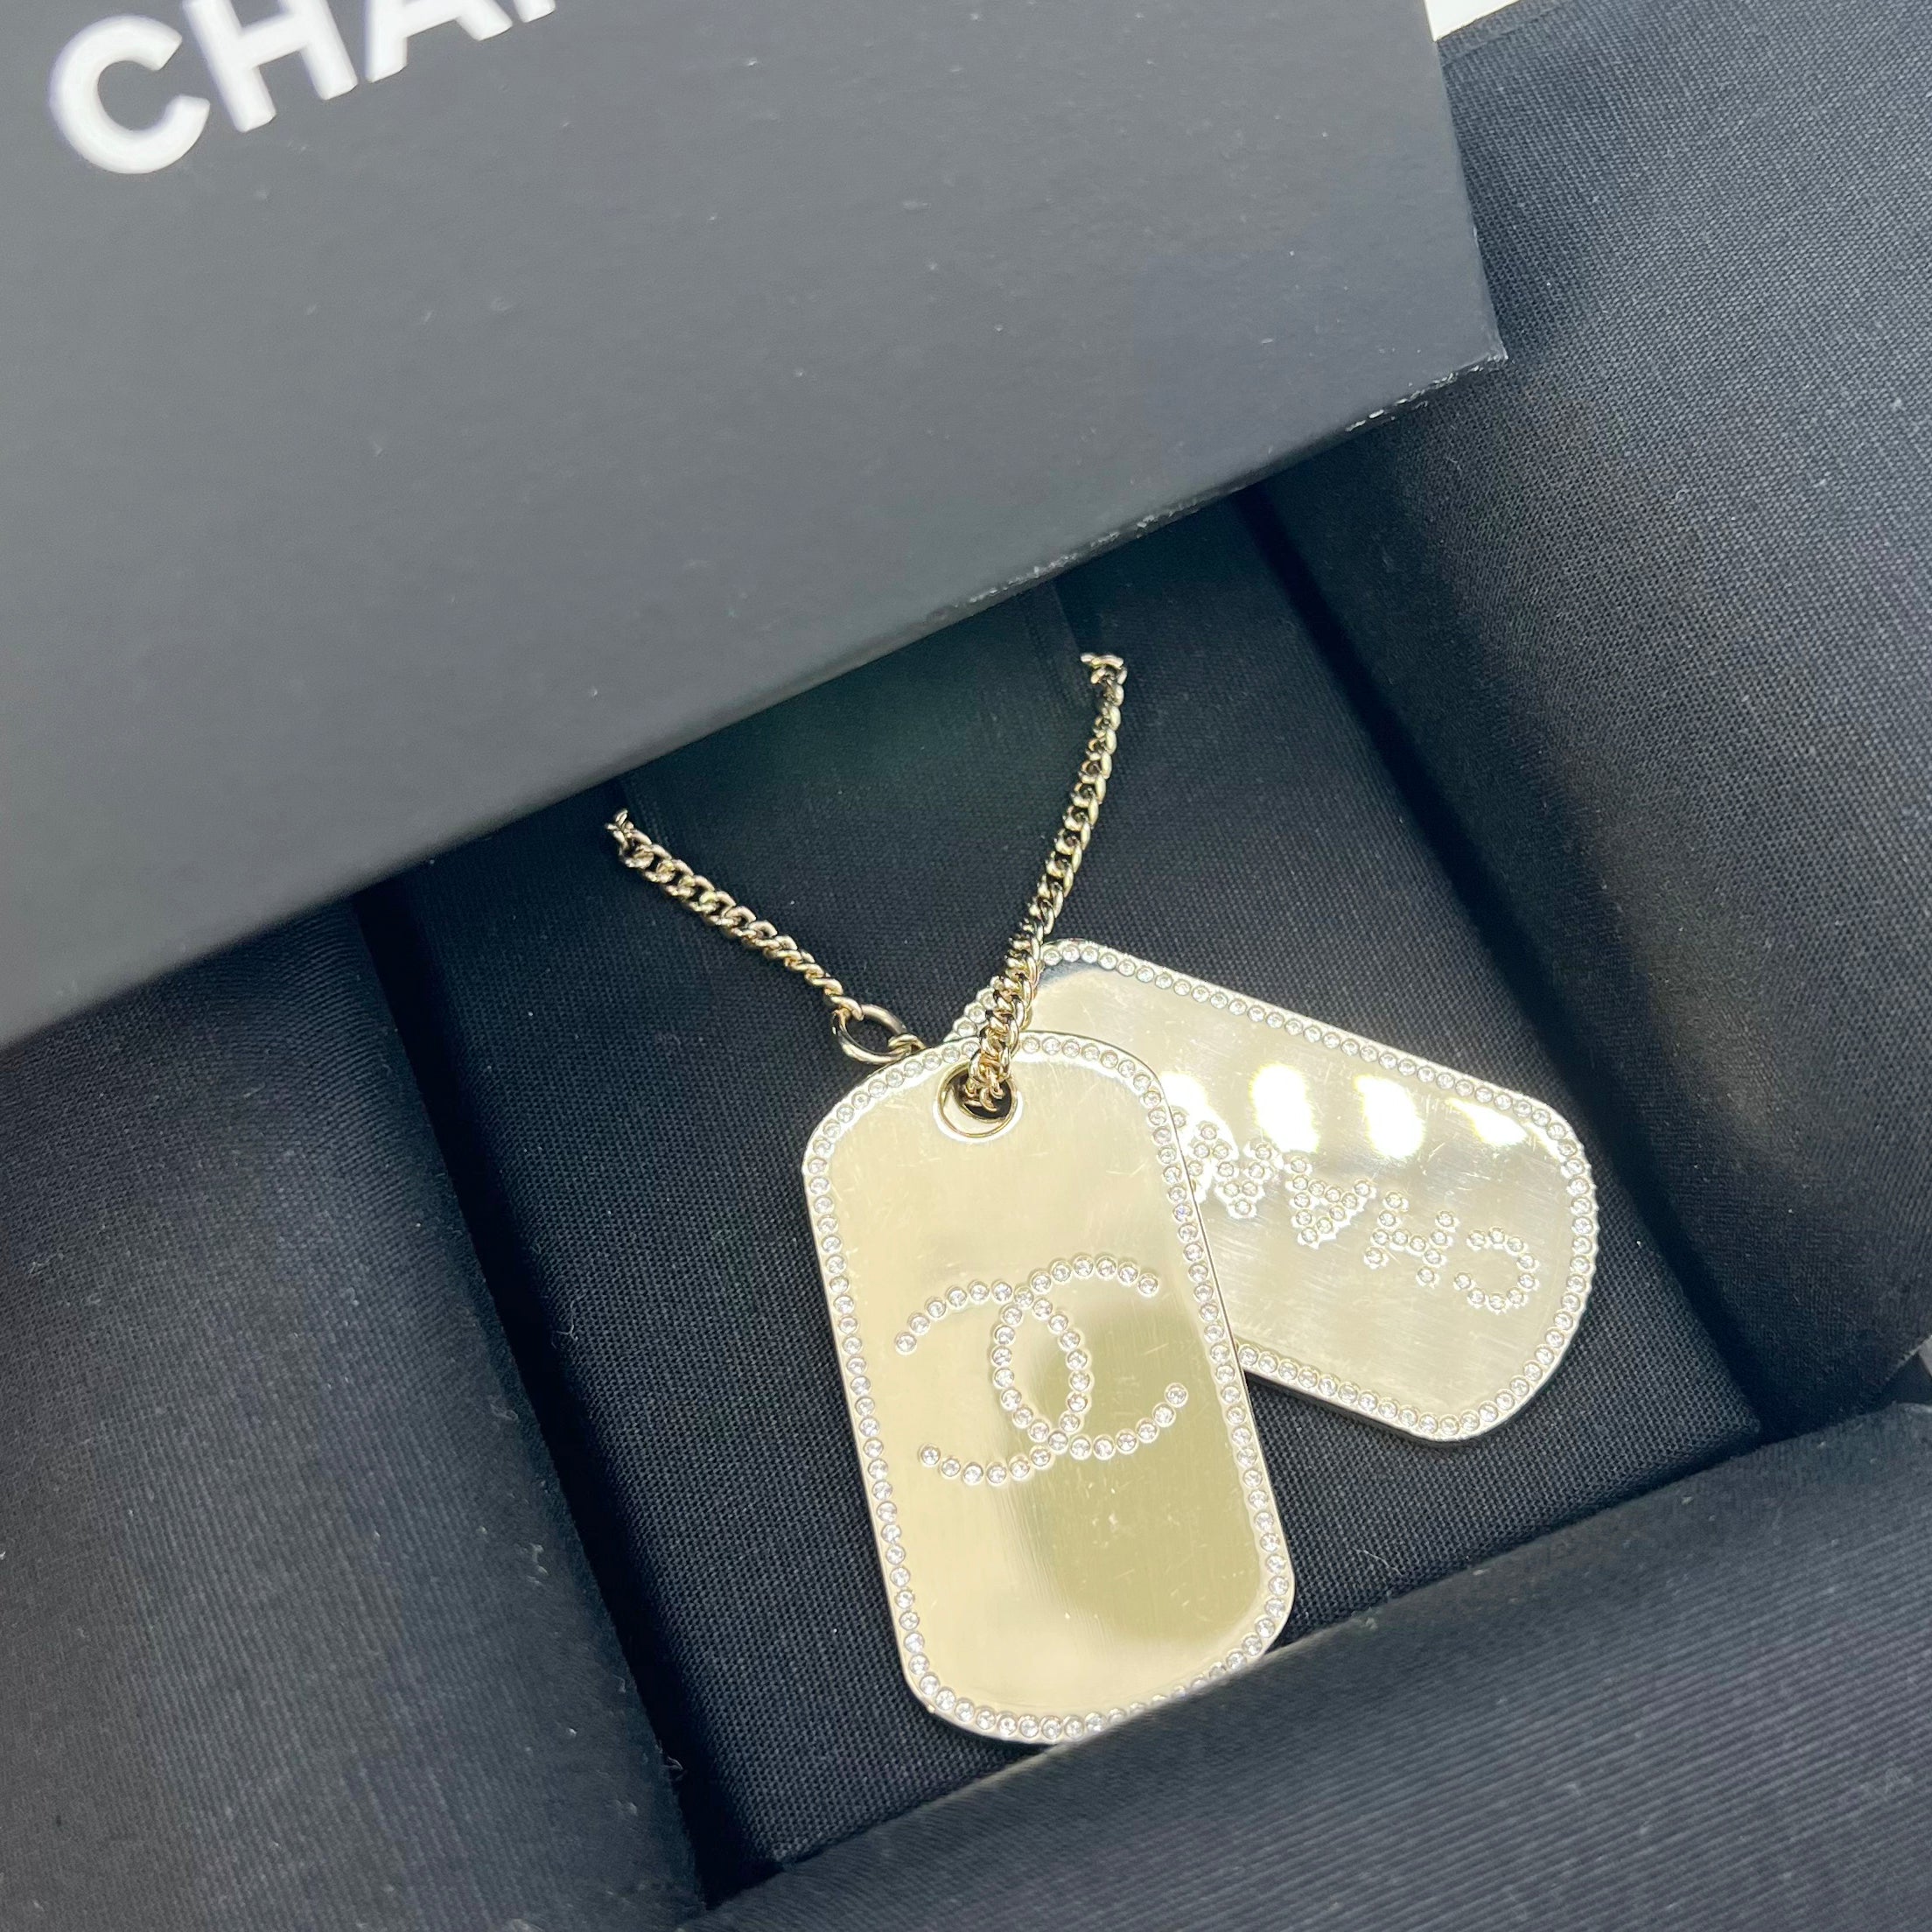 Authentic Chanel Gold Plating Necklace